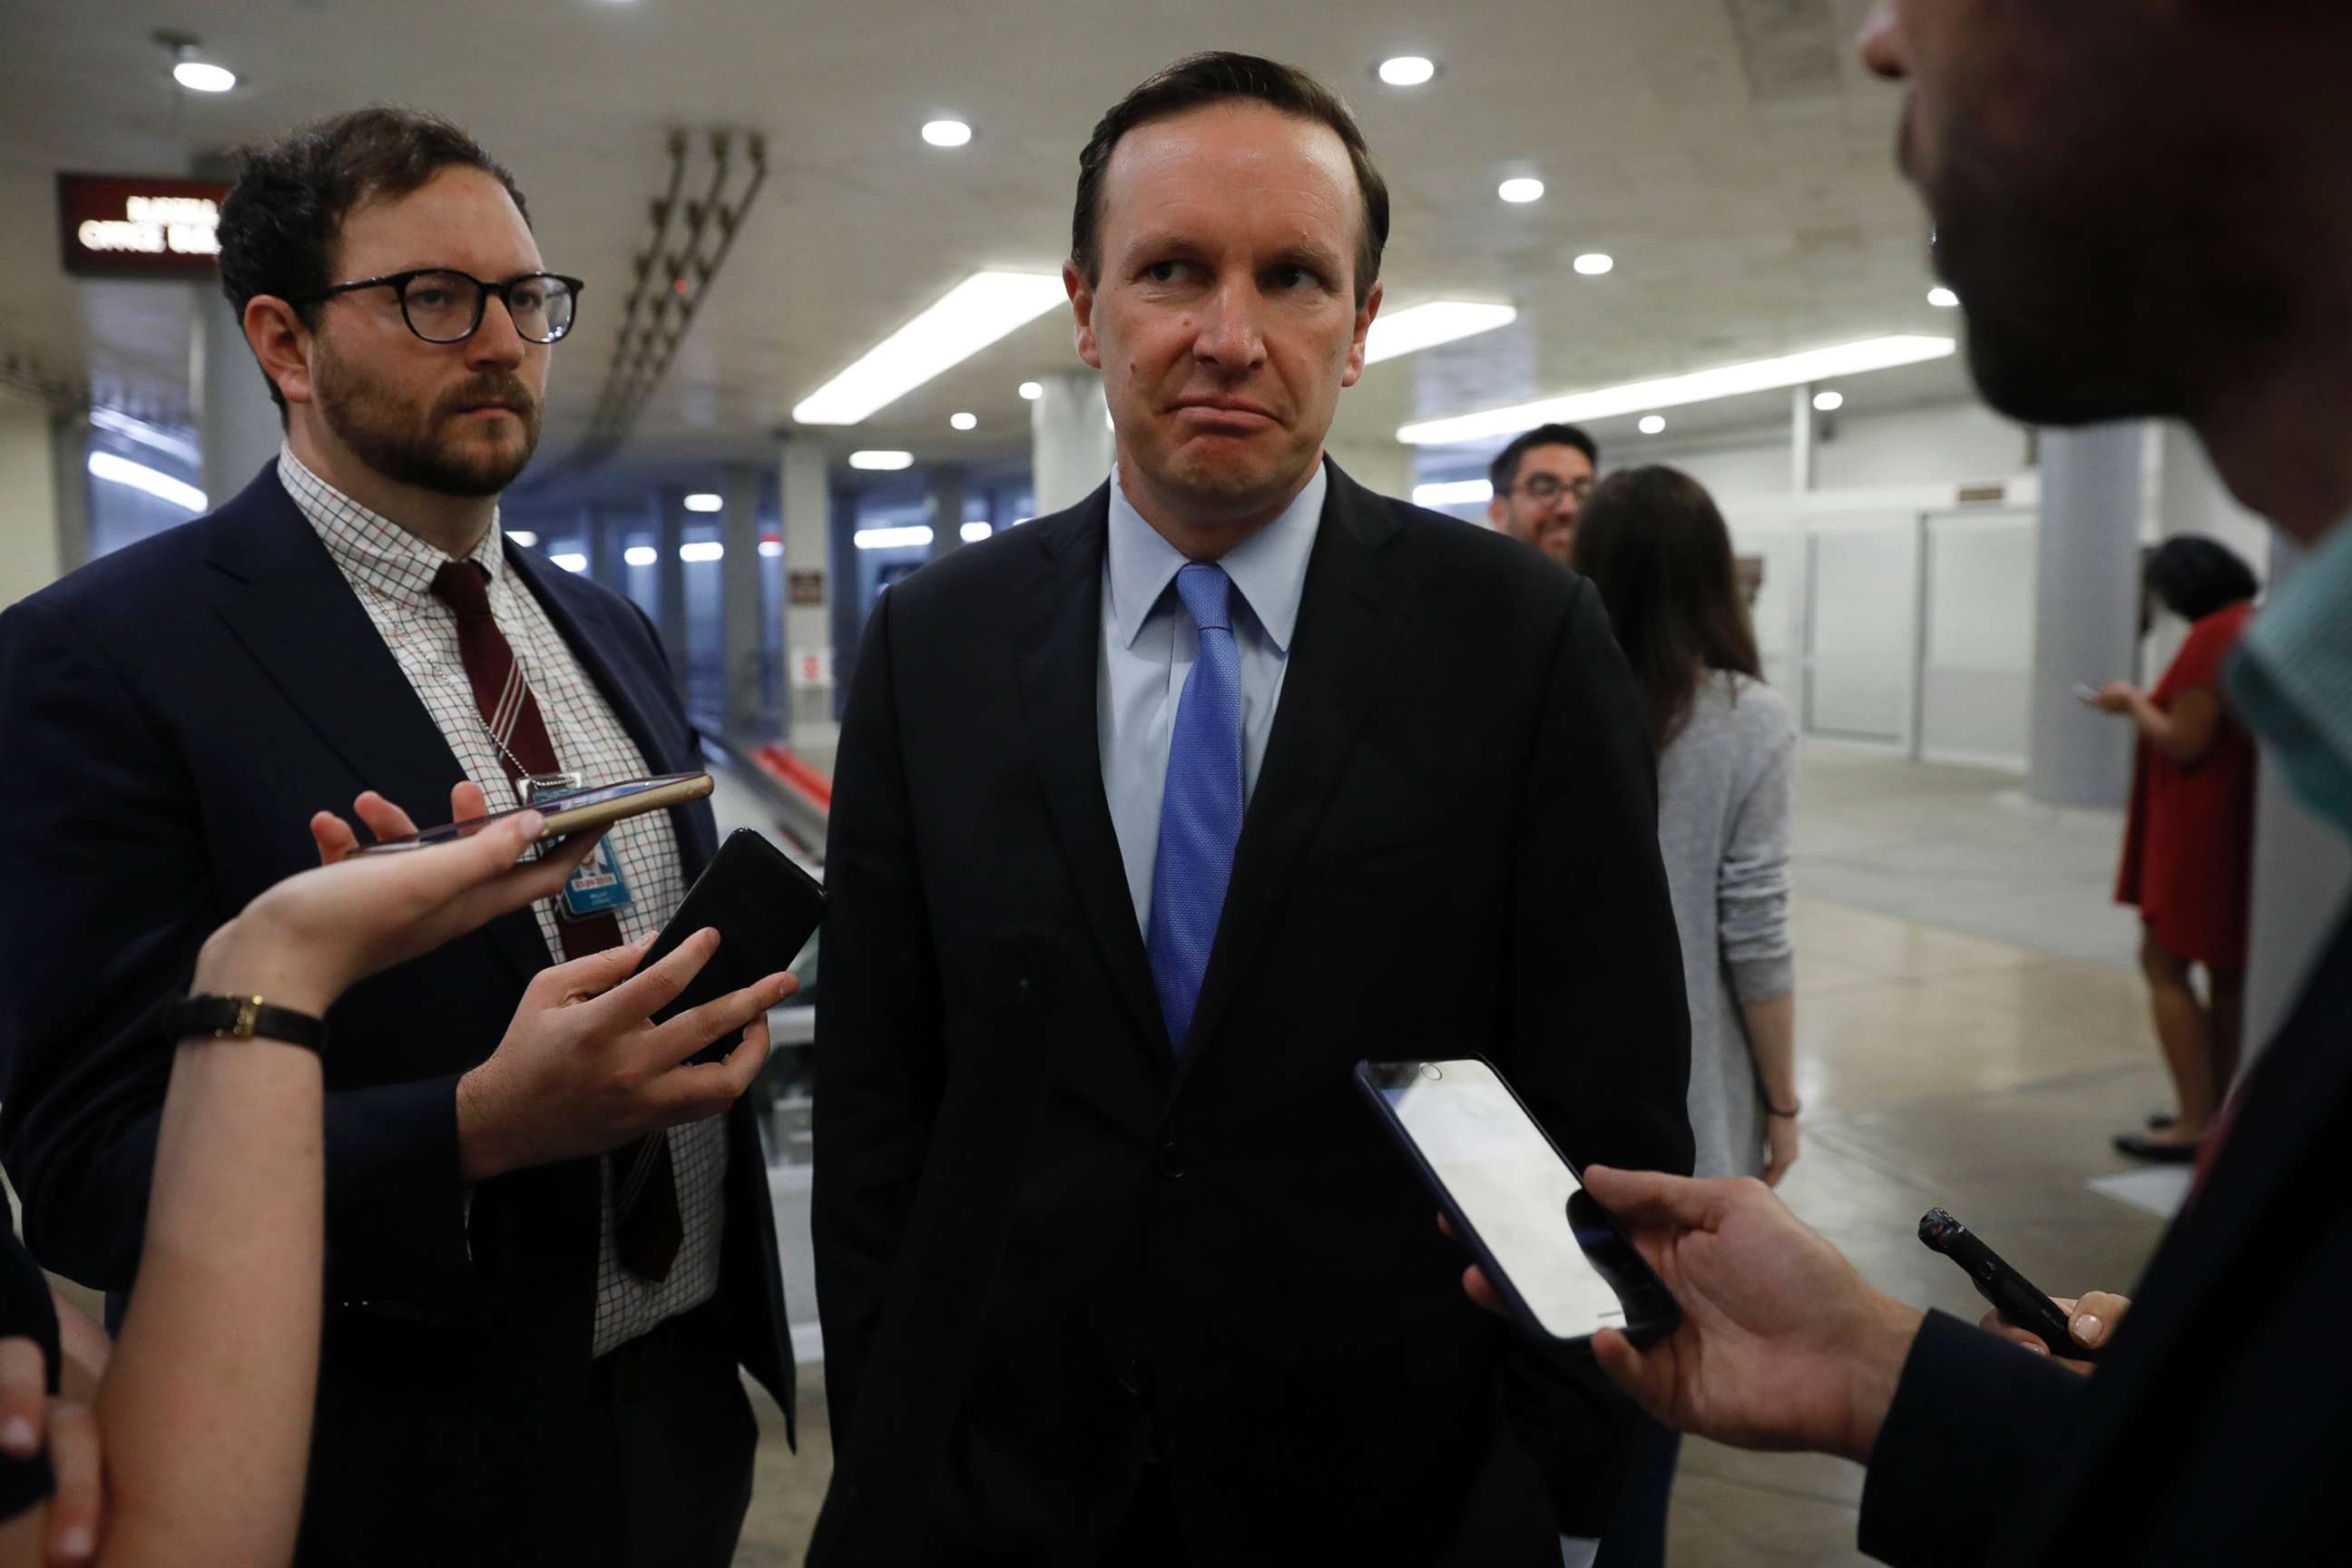 PHOTO: Sen. Chris Murphy speaks with reporters ahead of the weekly policy luncheons at the U.S. Capitol on June 26, 2018 in Washington, D.C.